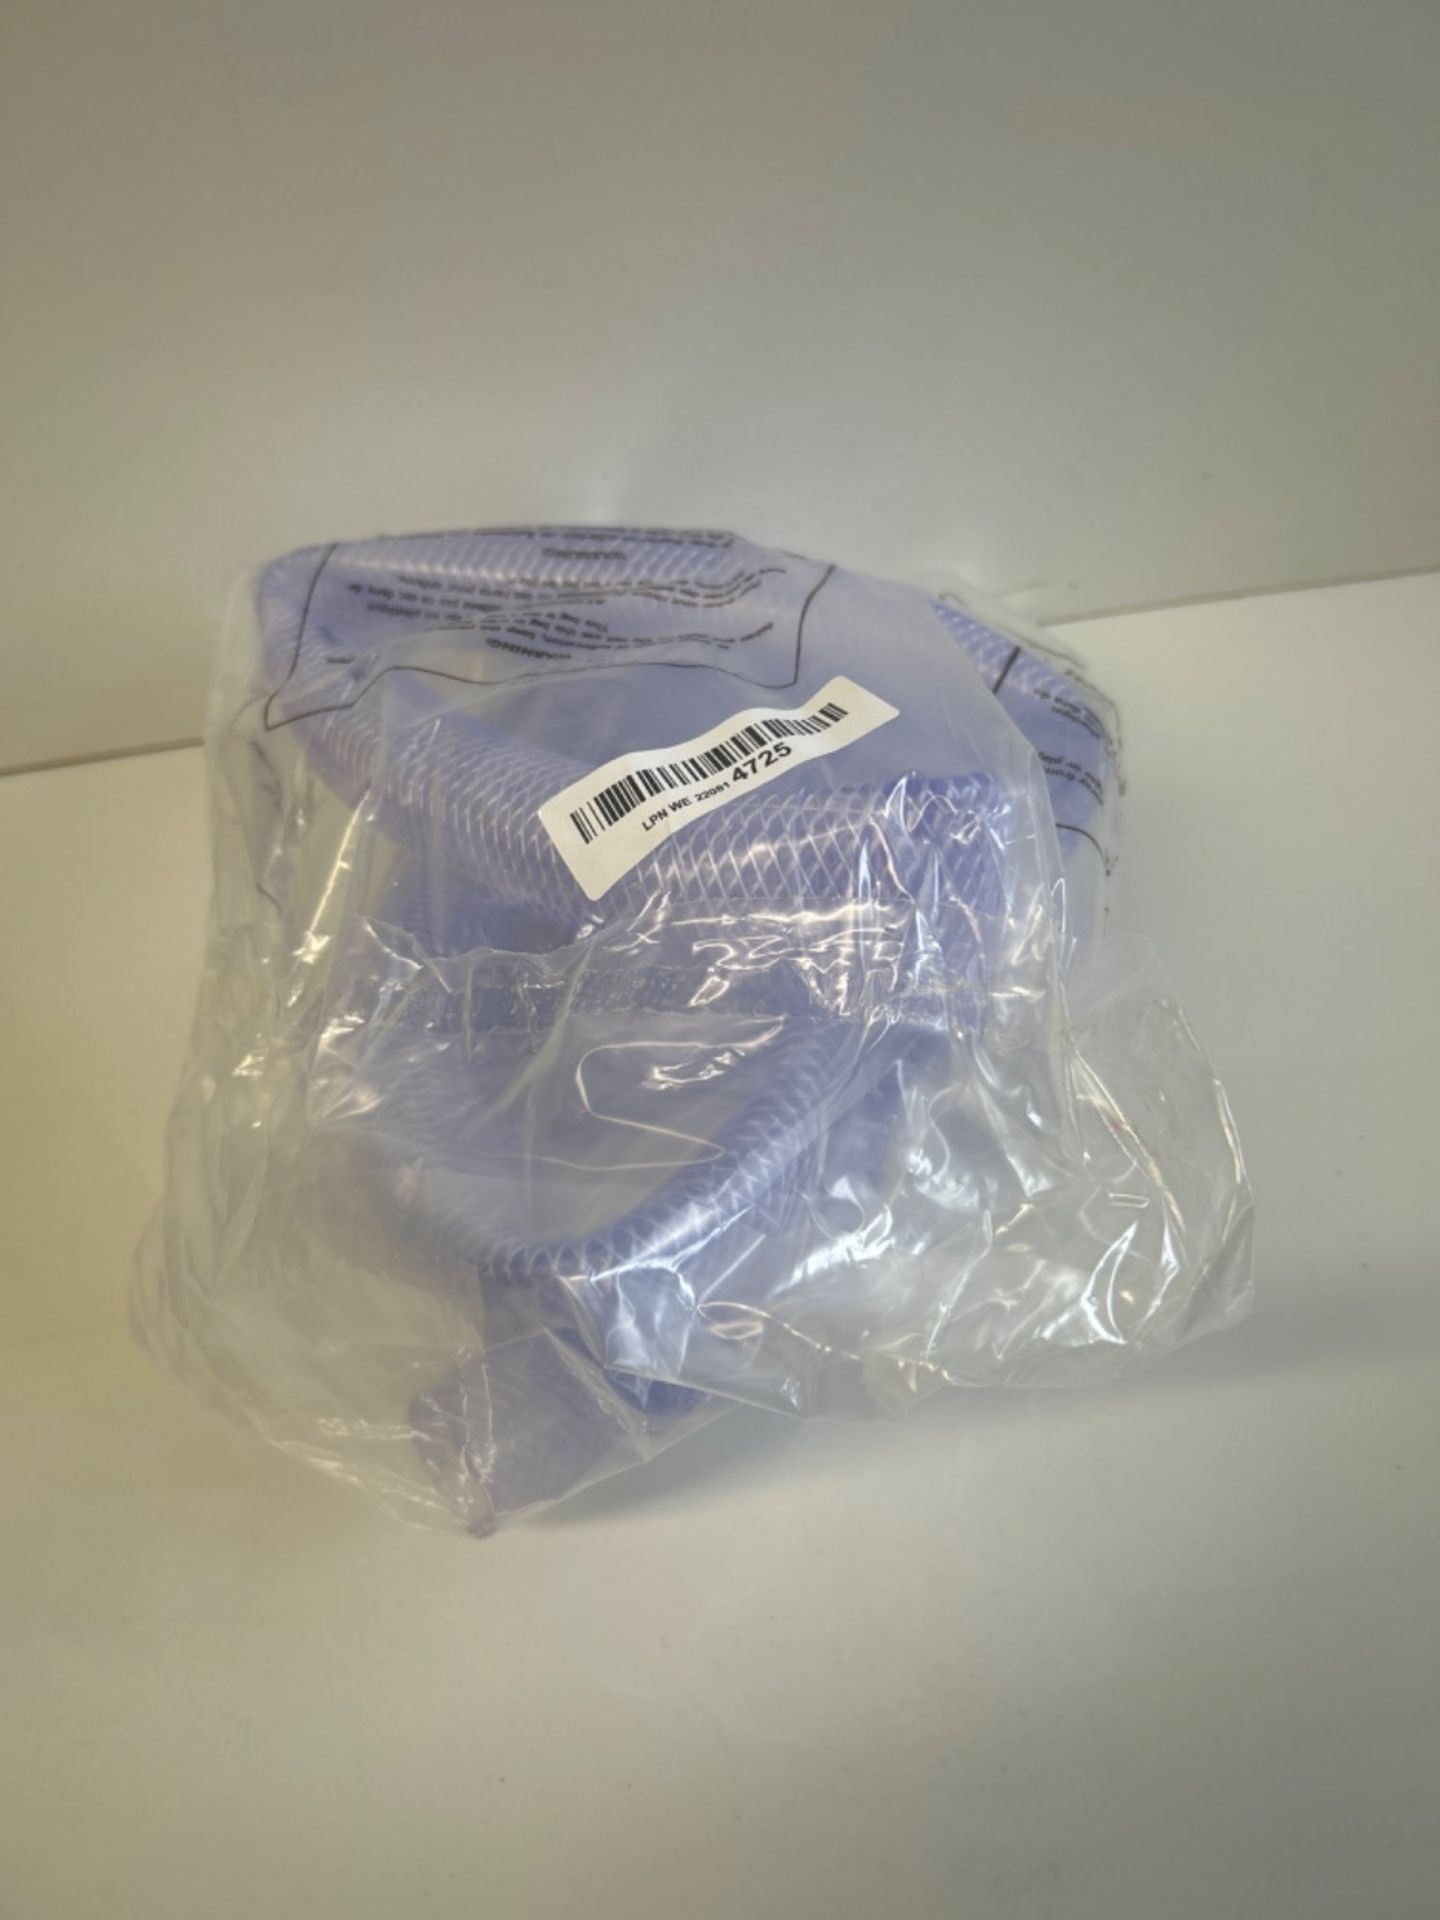 25mm ID 1 Metre Length Clear Braided PVC Hose with Synthetic Reinforcement - Image 2 of 3